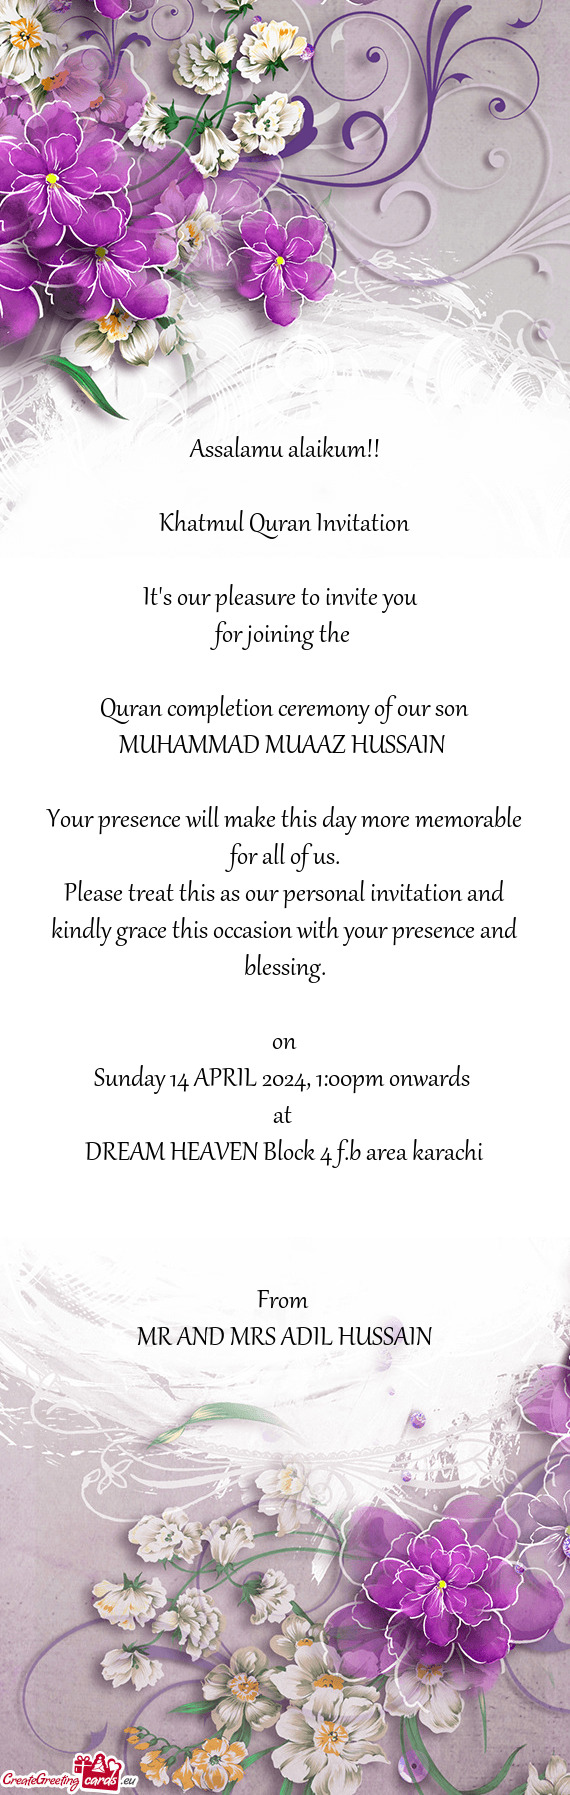 Quran completion ceremony of our son MUHAMMAD MUAAZ HUSSAIN